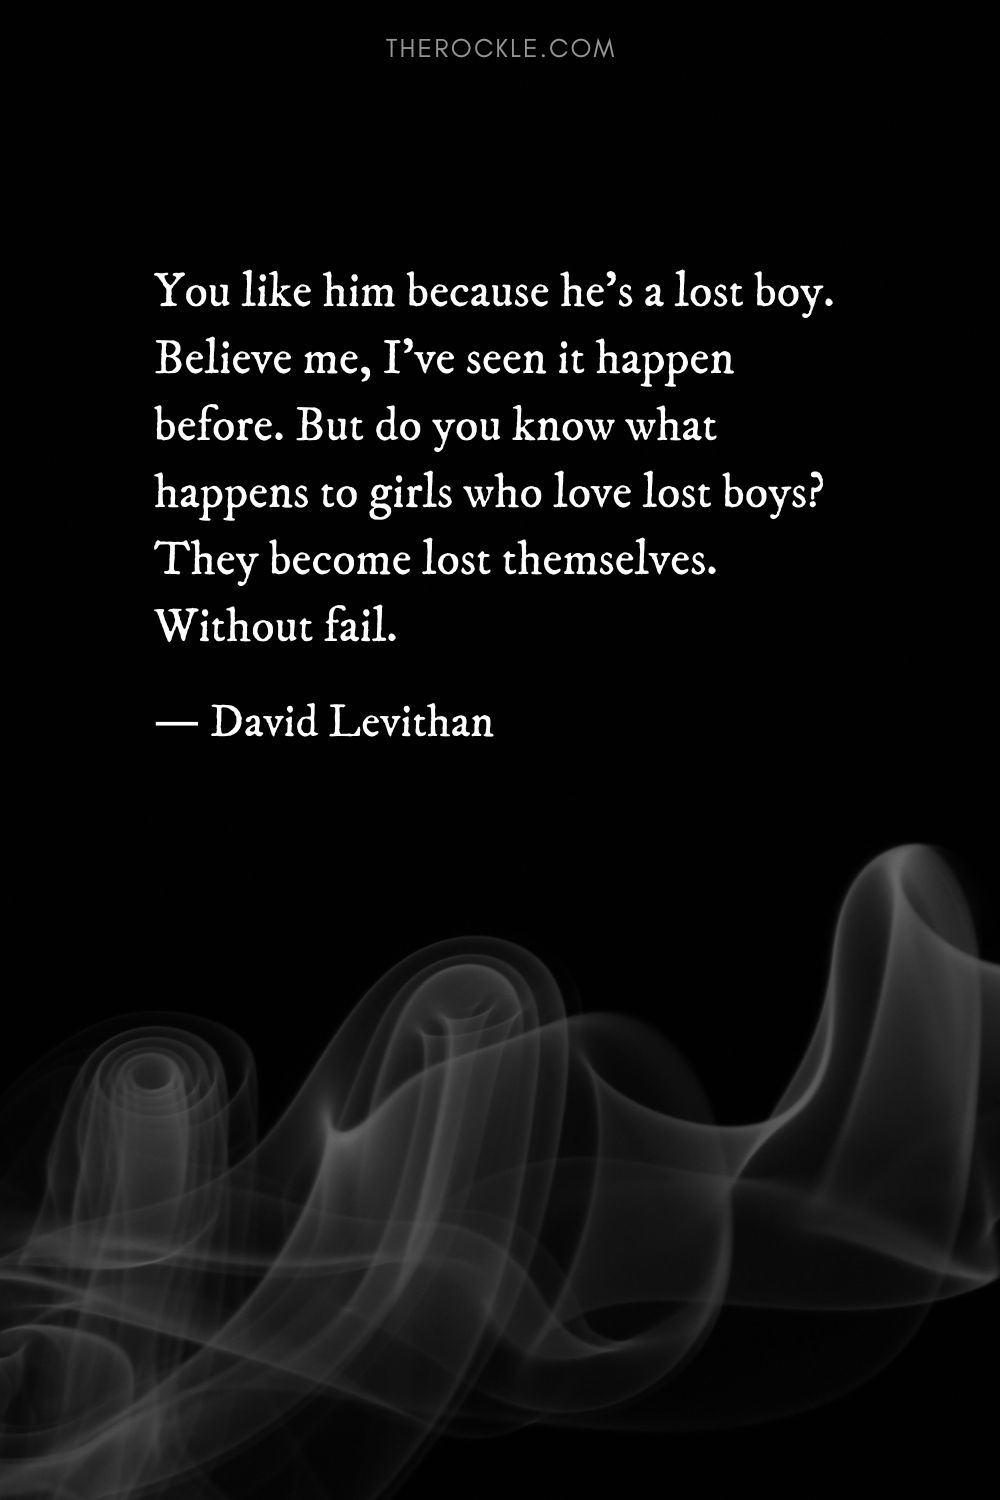 Dark love quote by David Levithan: “You like him because he's a lost boy. Believe me, I've seen it happen before. But do you know what happens to girls who love lost boys? They become lost themselves. Without fail.” 